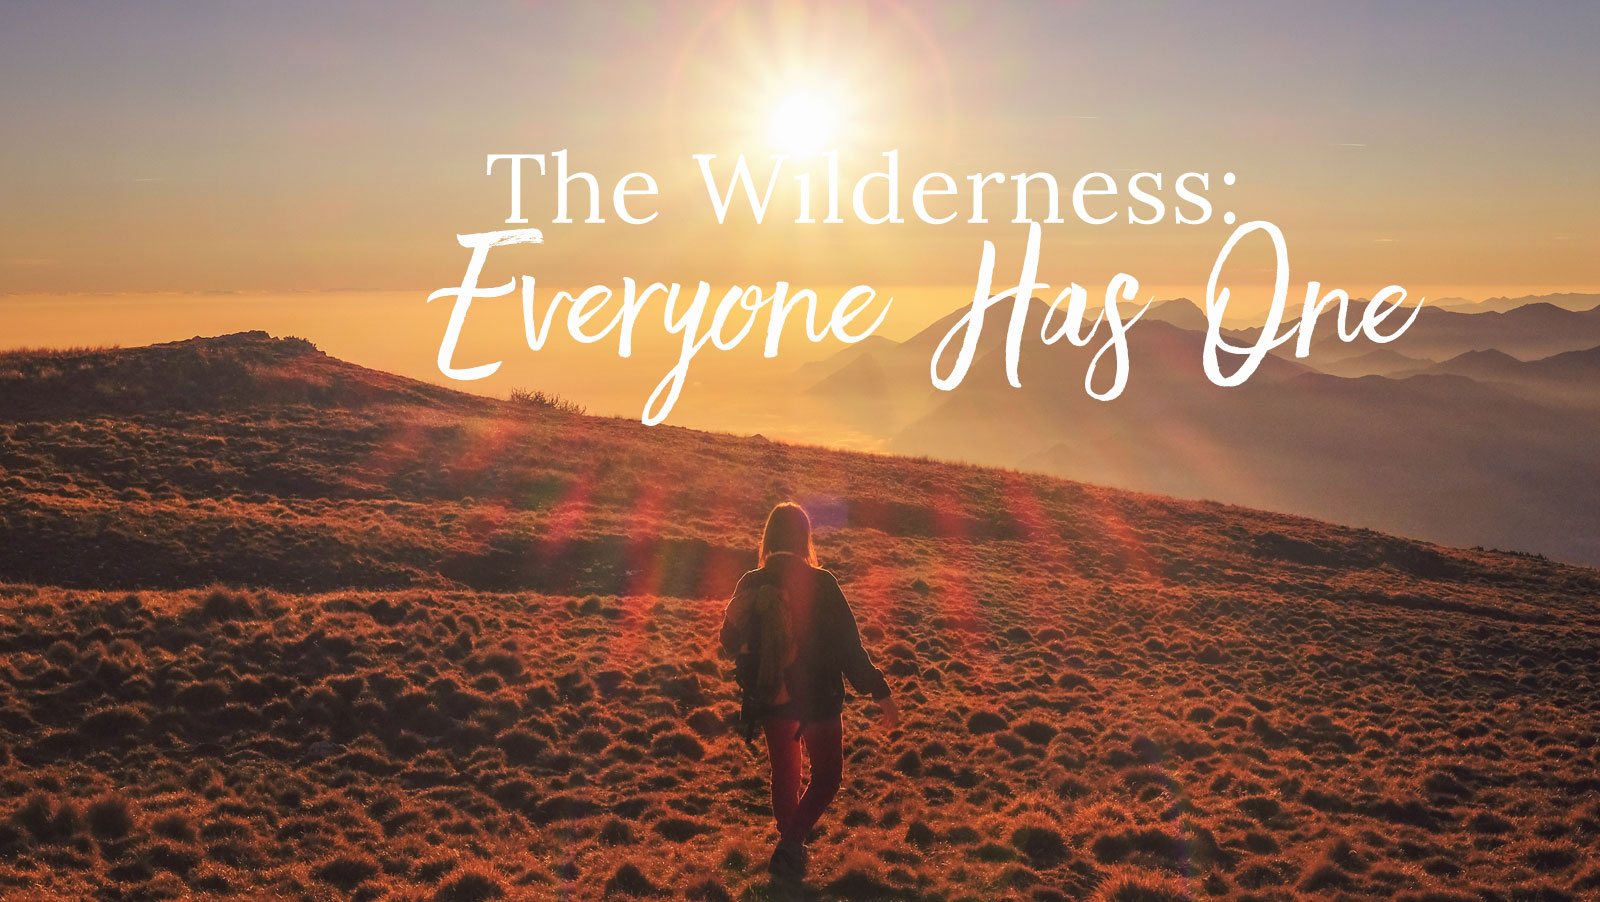 The Wilderness: Everyone Has One